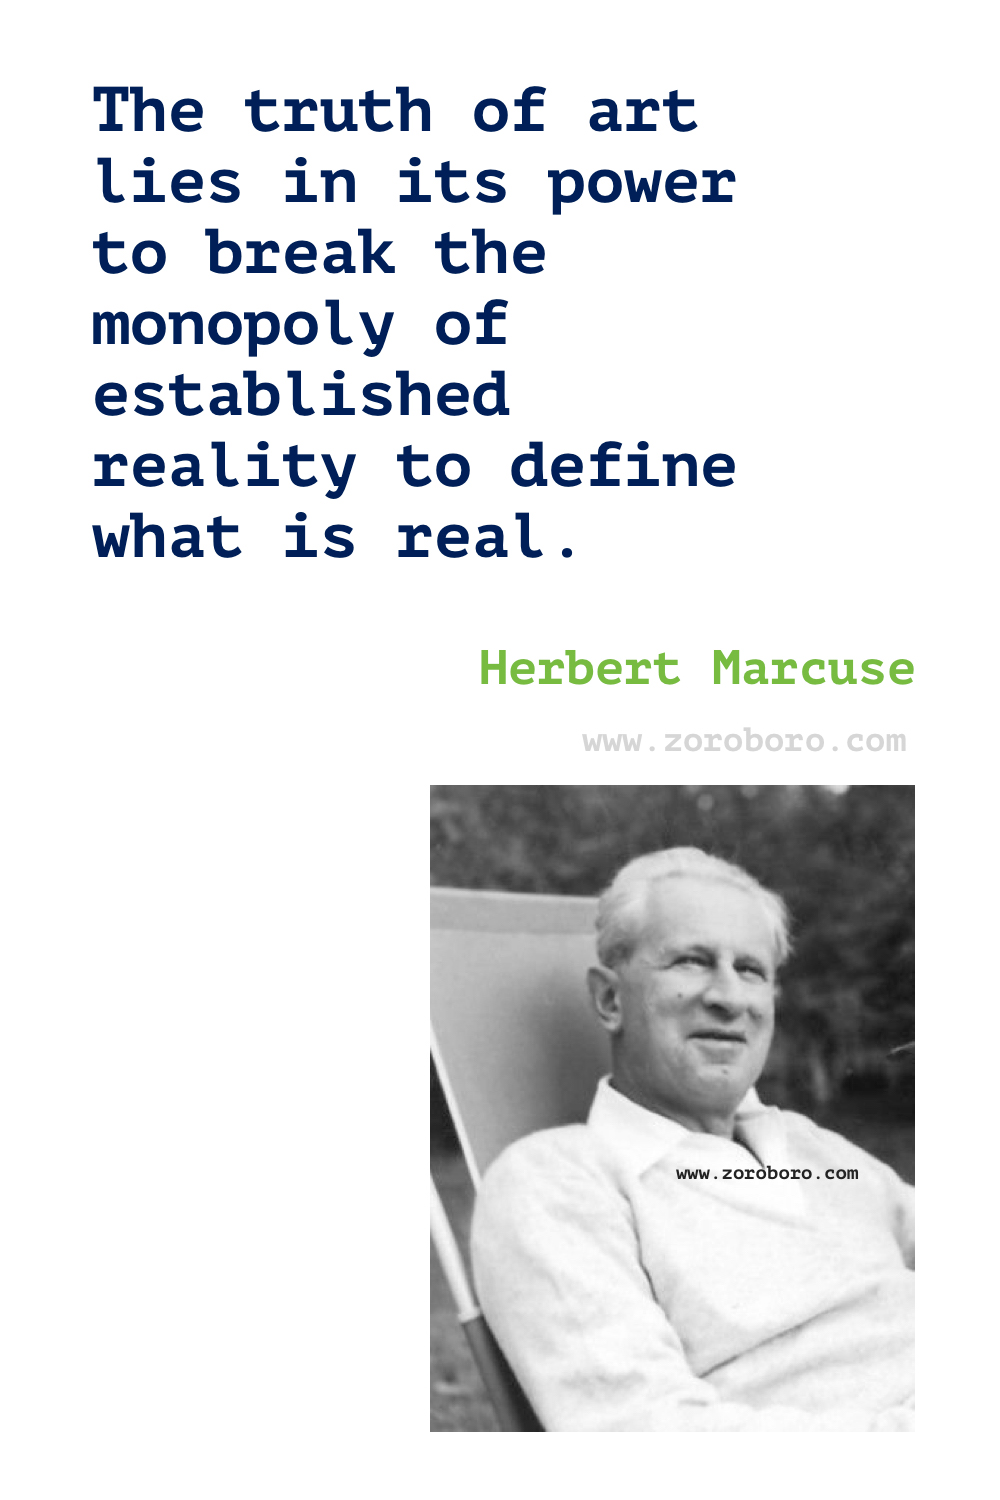 Herbert Marcuse Quotes. Herbert Marcuse One-Dimensional Man Quotes. An Essay on Liberation. Herbert Marcuse Philosophy. Herbert Marcuse Books Quotes. Critique of capitalism. Herbert Marcuse